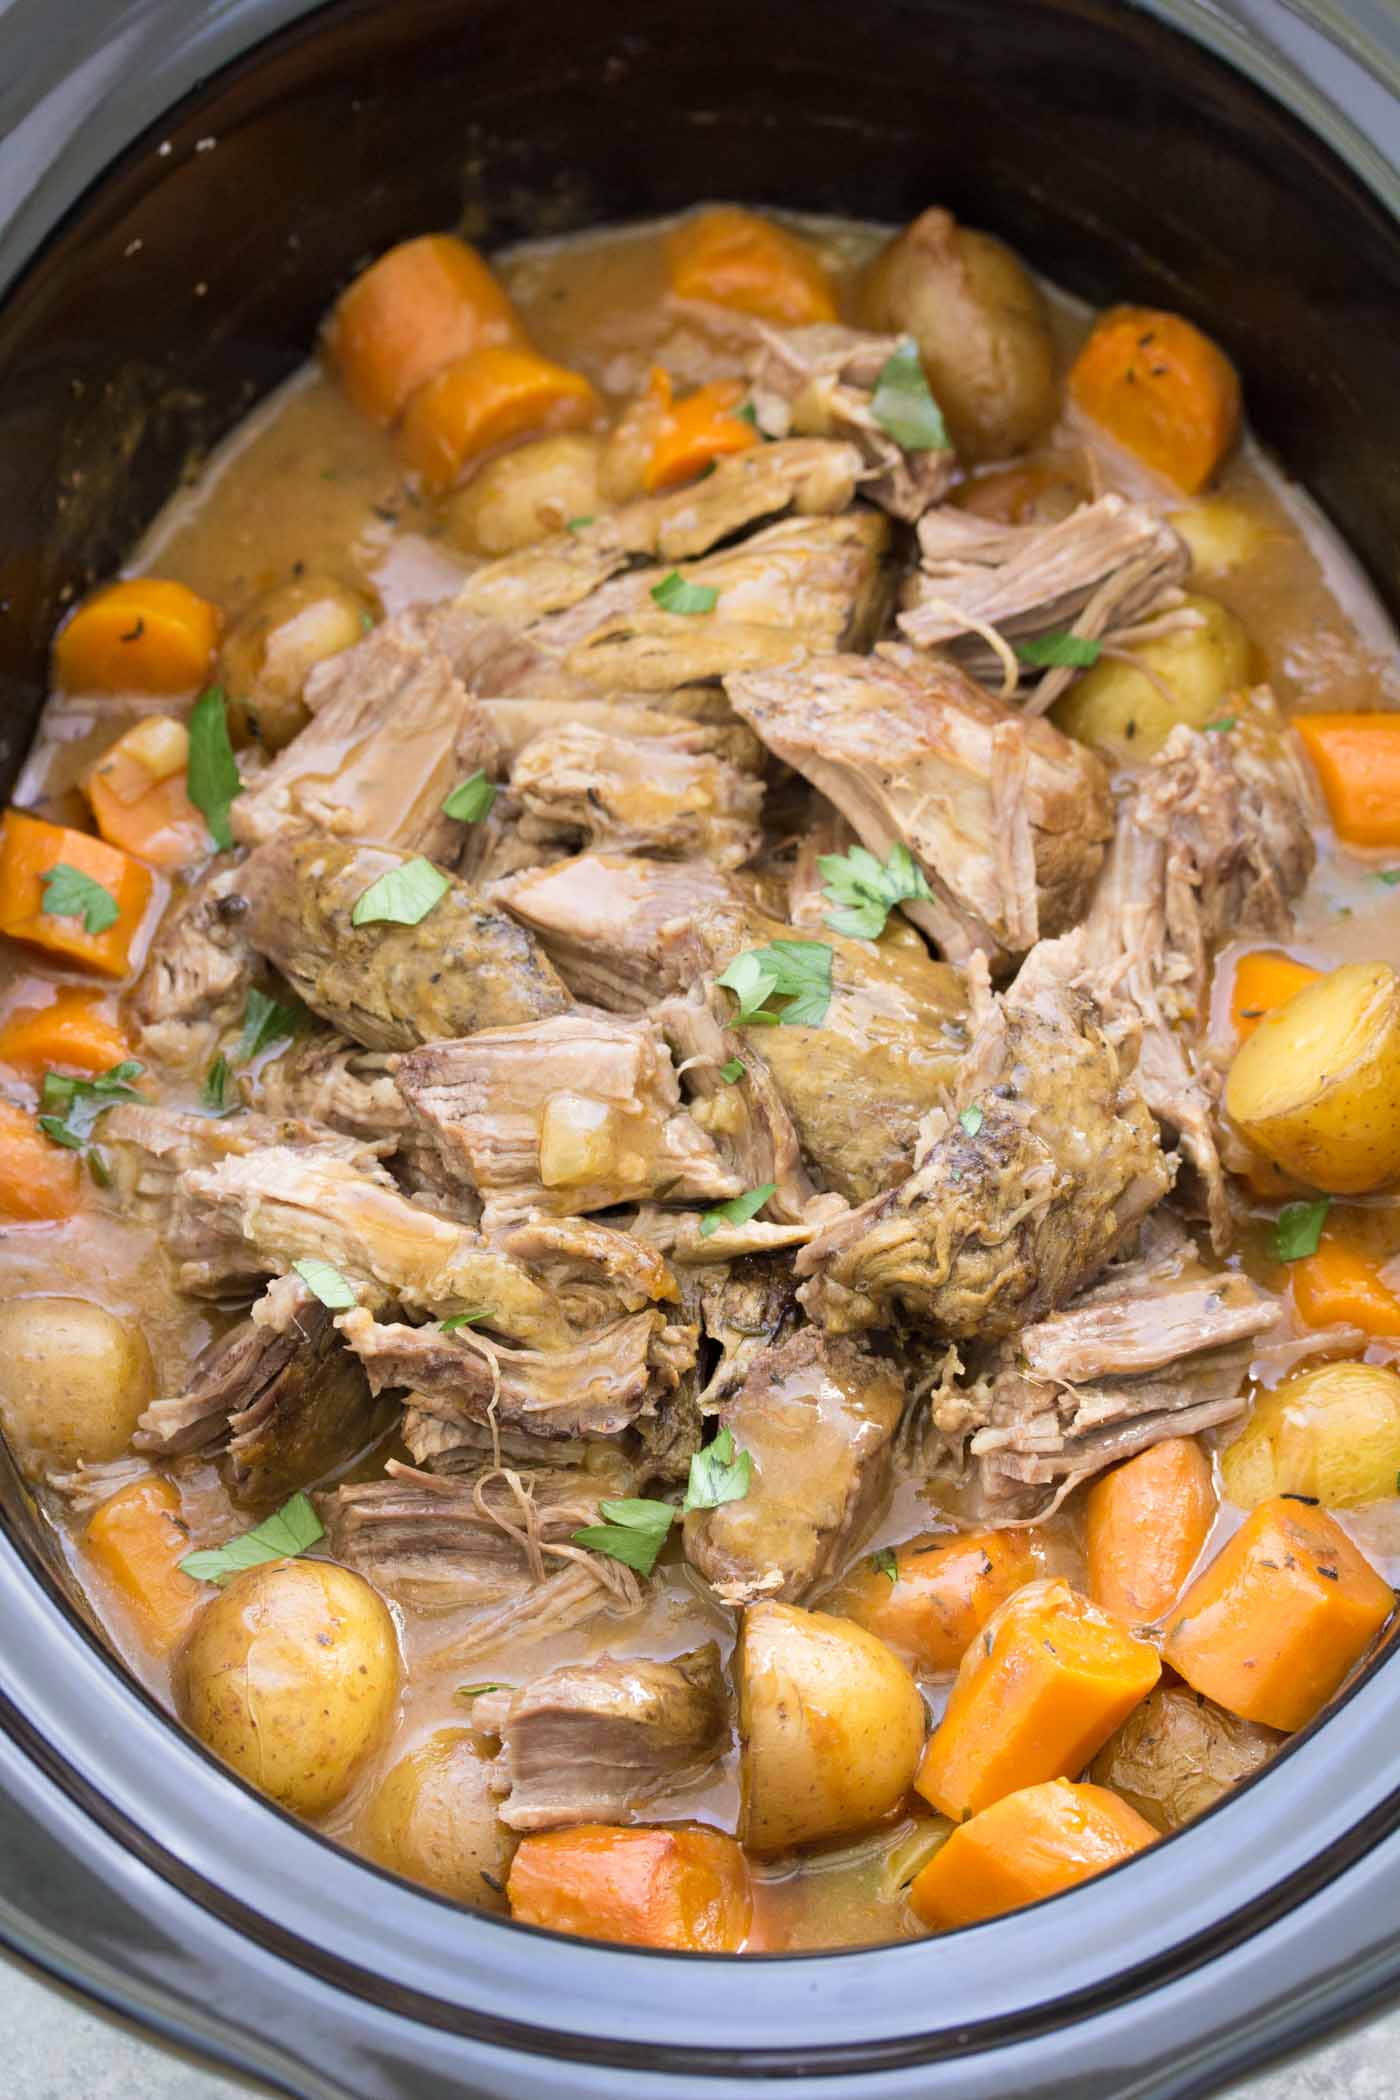 Crock pot roast shredded in a slow cooker, with potatoes, carrots and gravy.